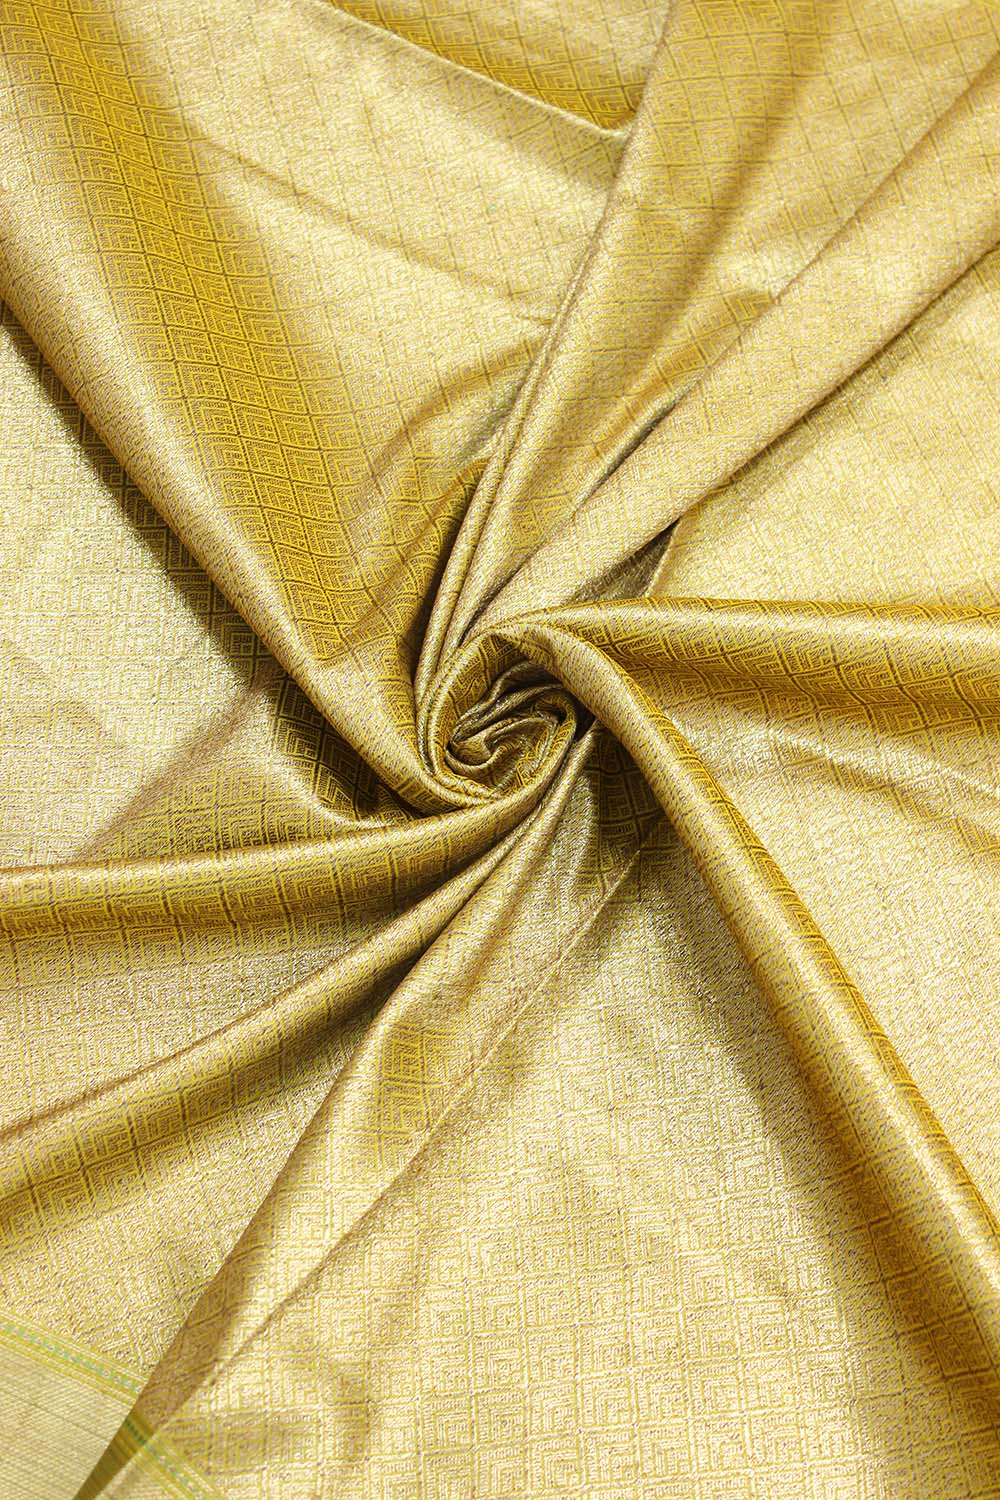 Shop Now for Yellow Banarasi Soft Silk Saree with Contrast Border - Latest Collection - Luxurion World